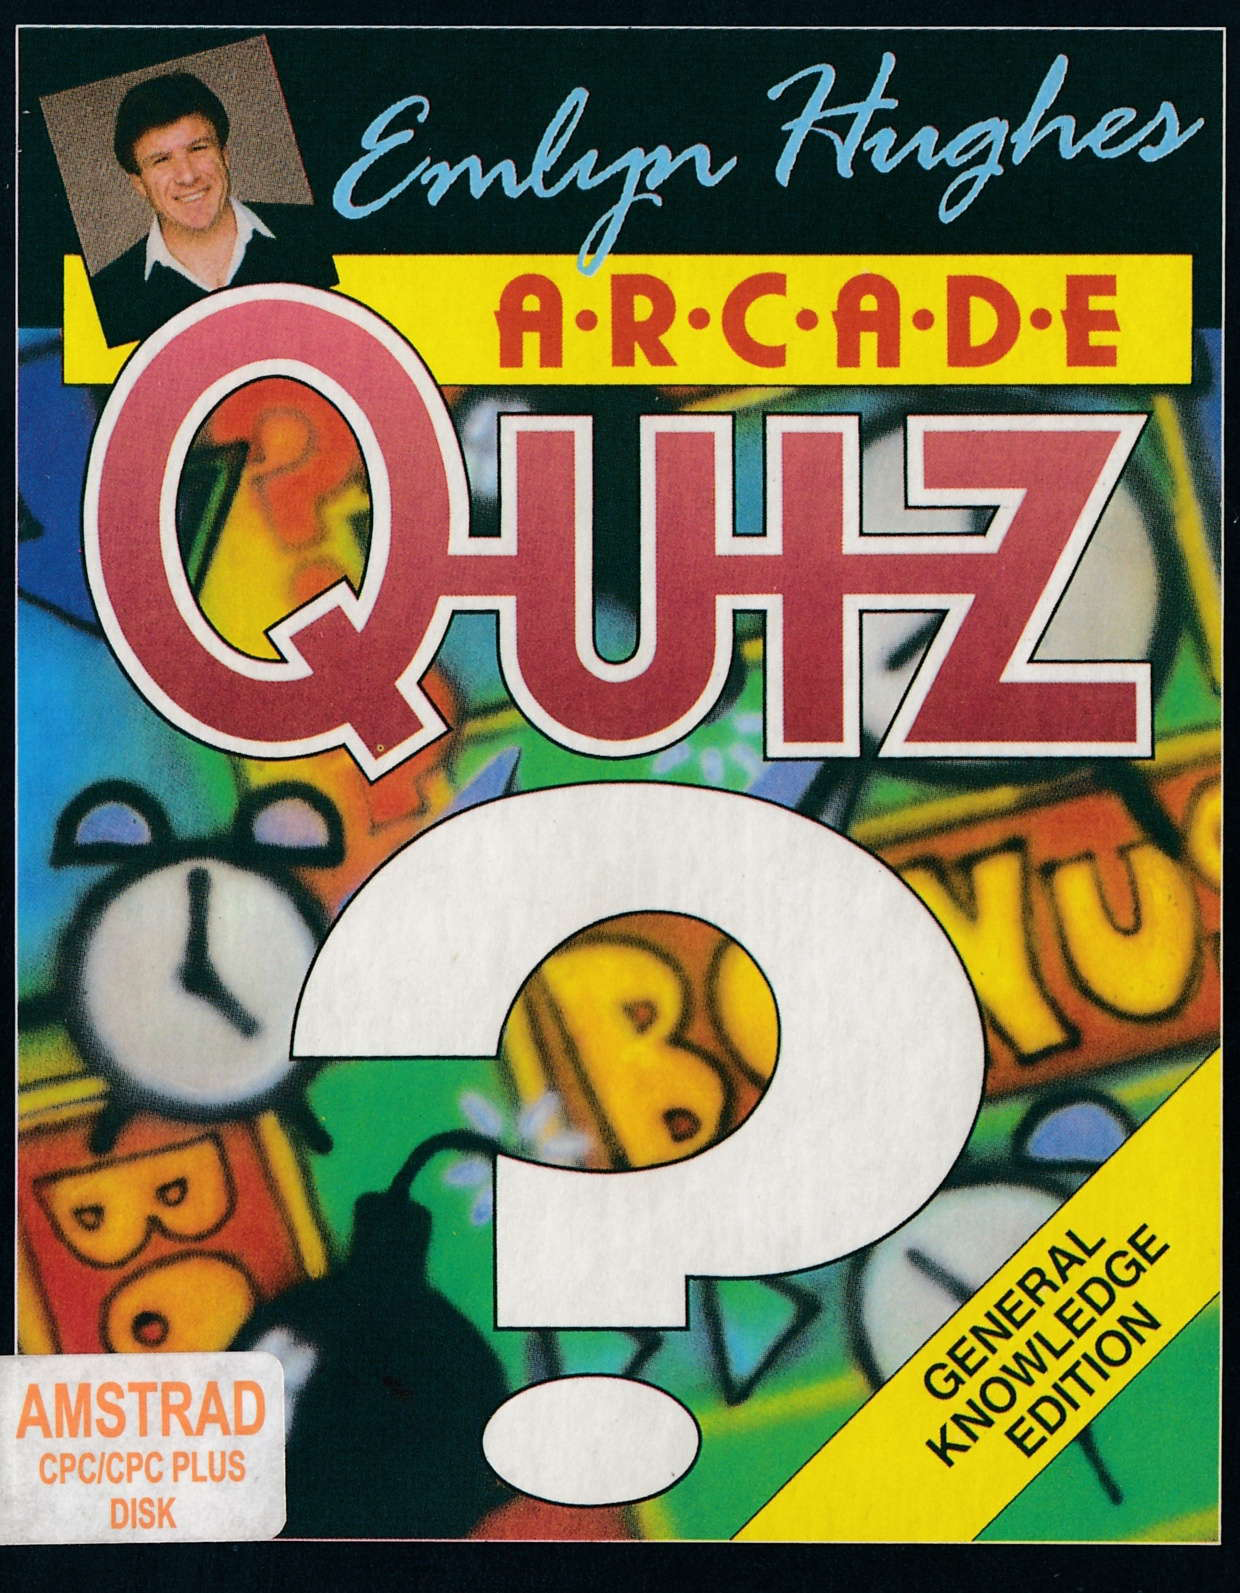 screenshot of the Amstrad CPC game Emlyn hughes arcade quiz by GameBase CPC